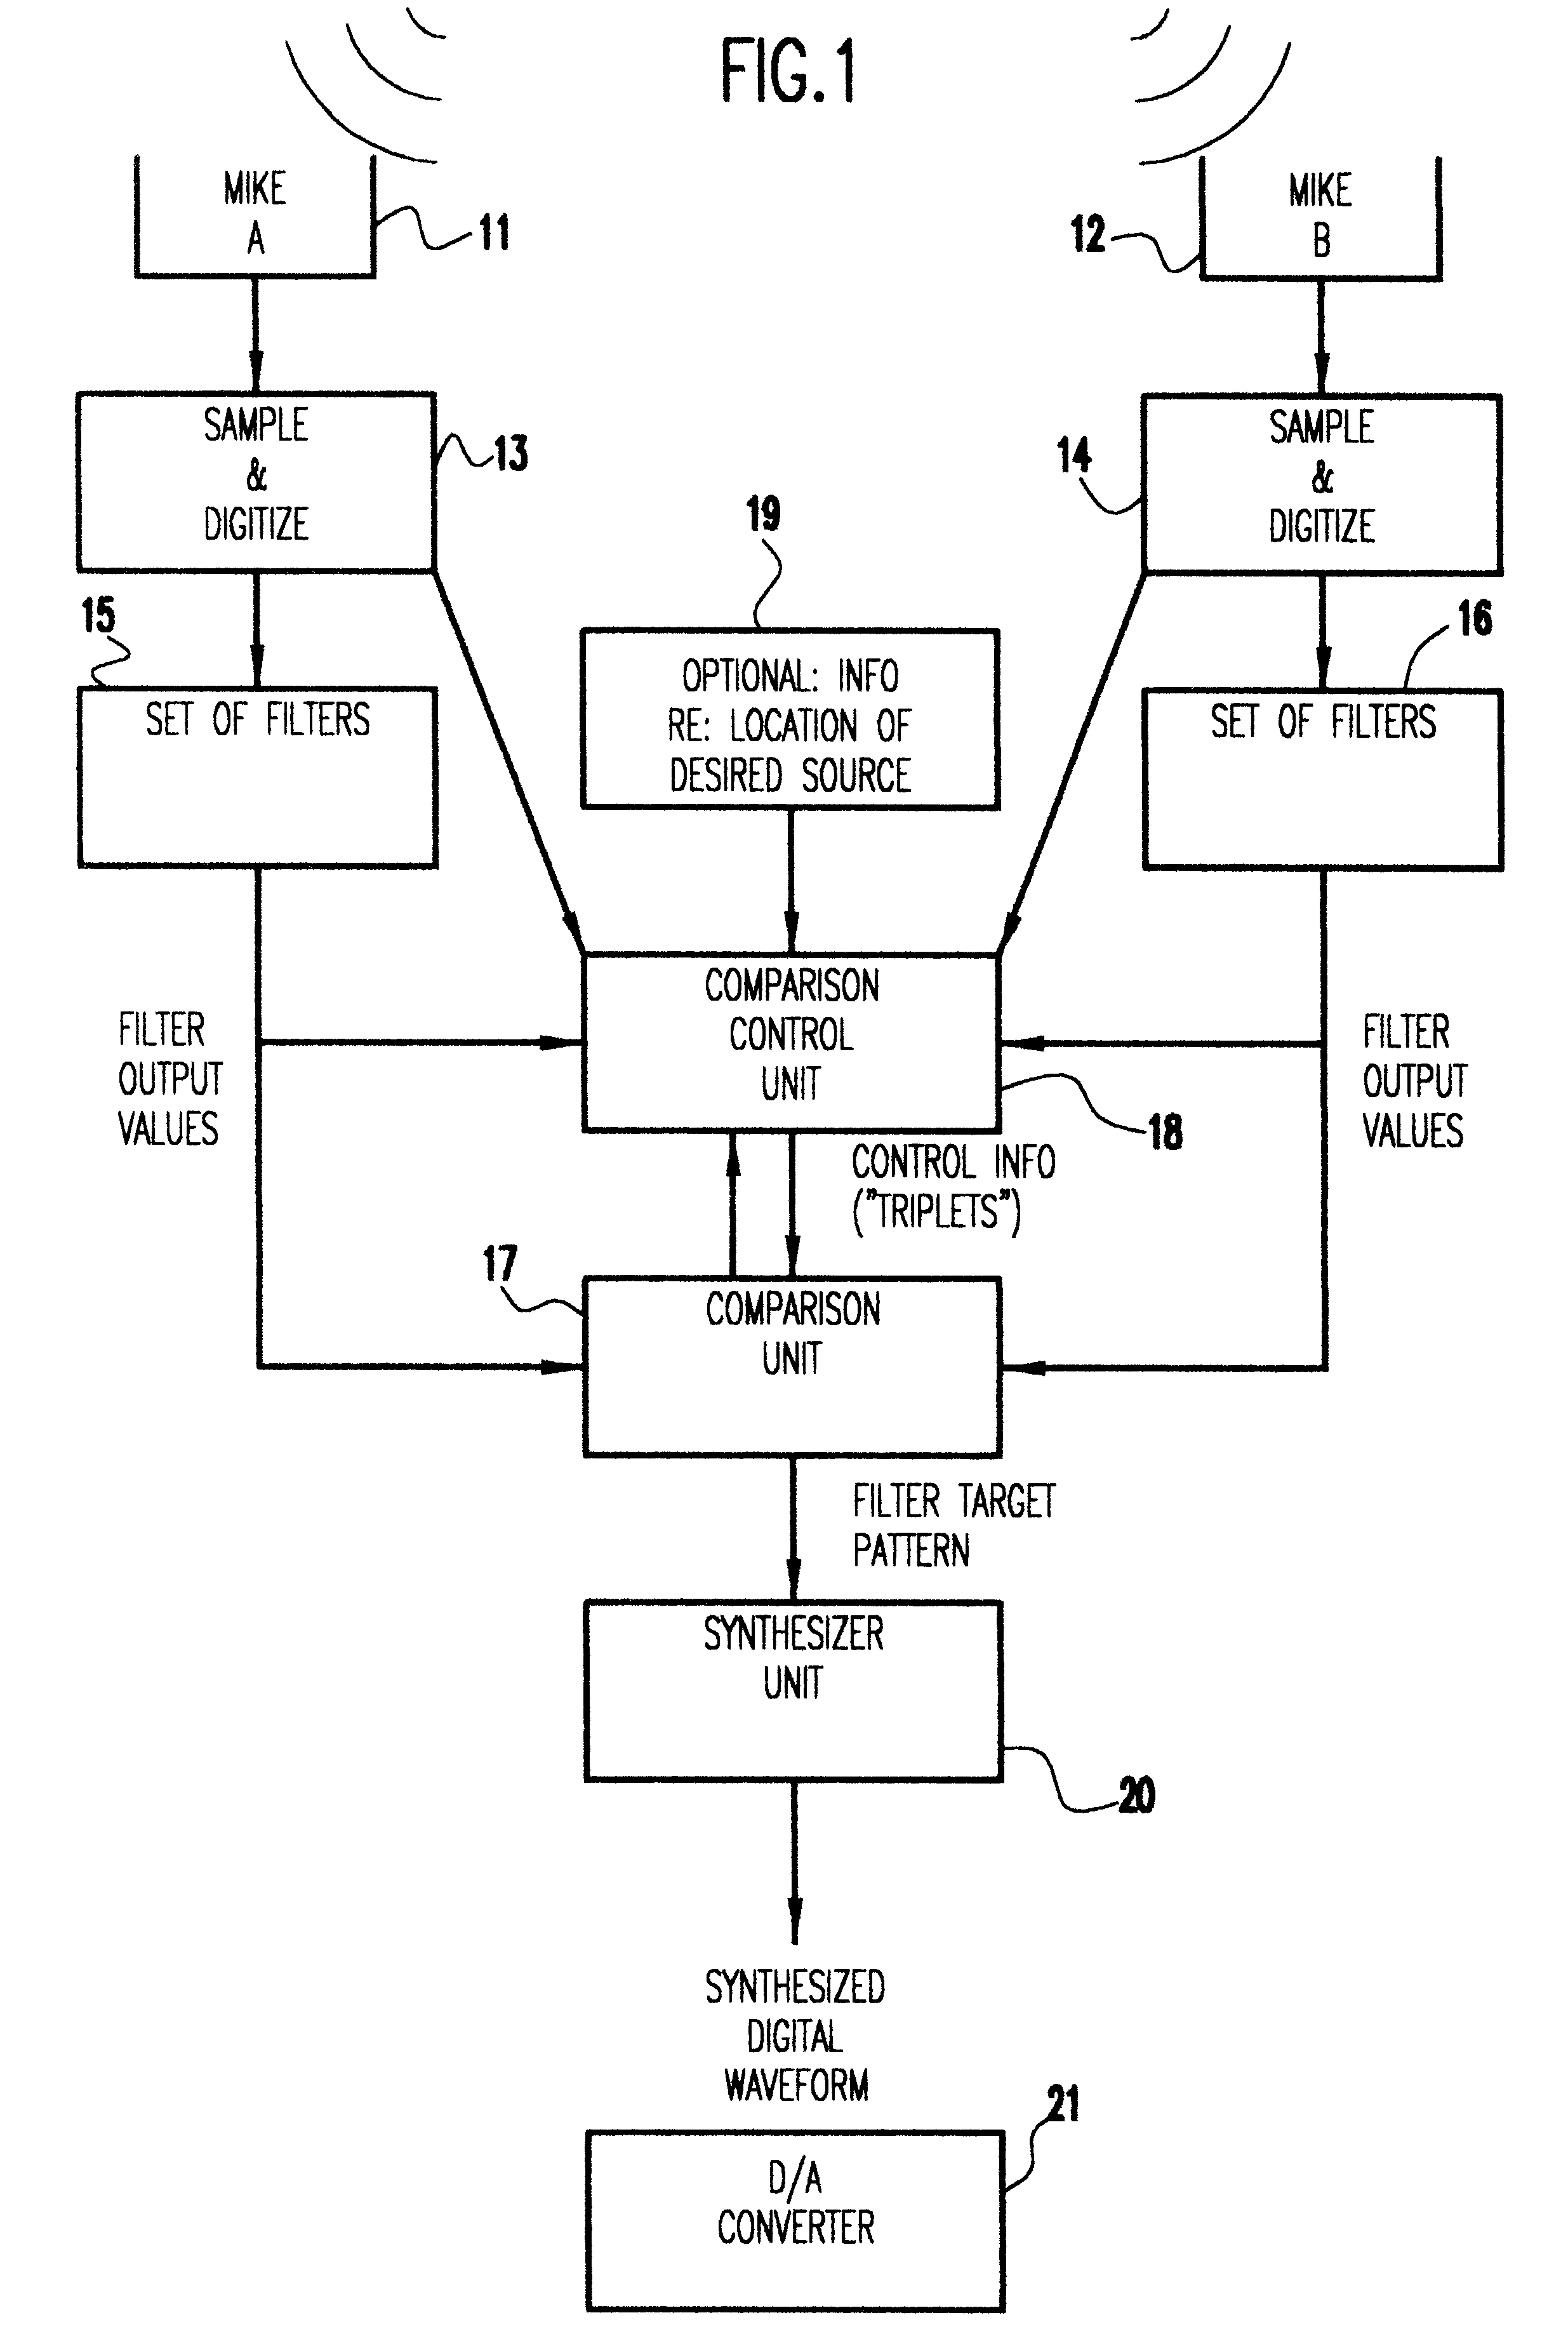 Separation of a mixture of acoustic sources into its components